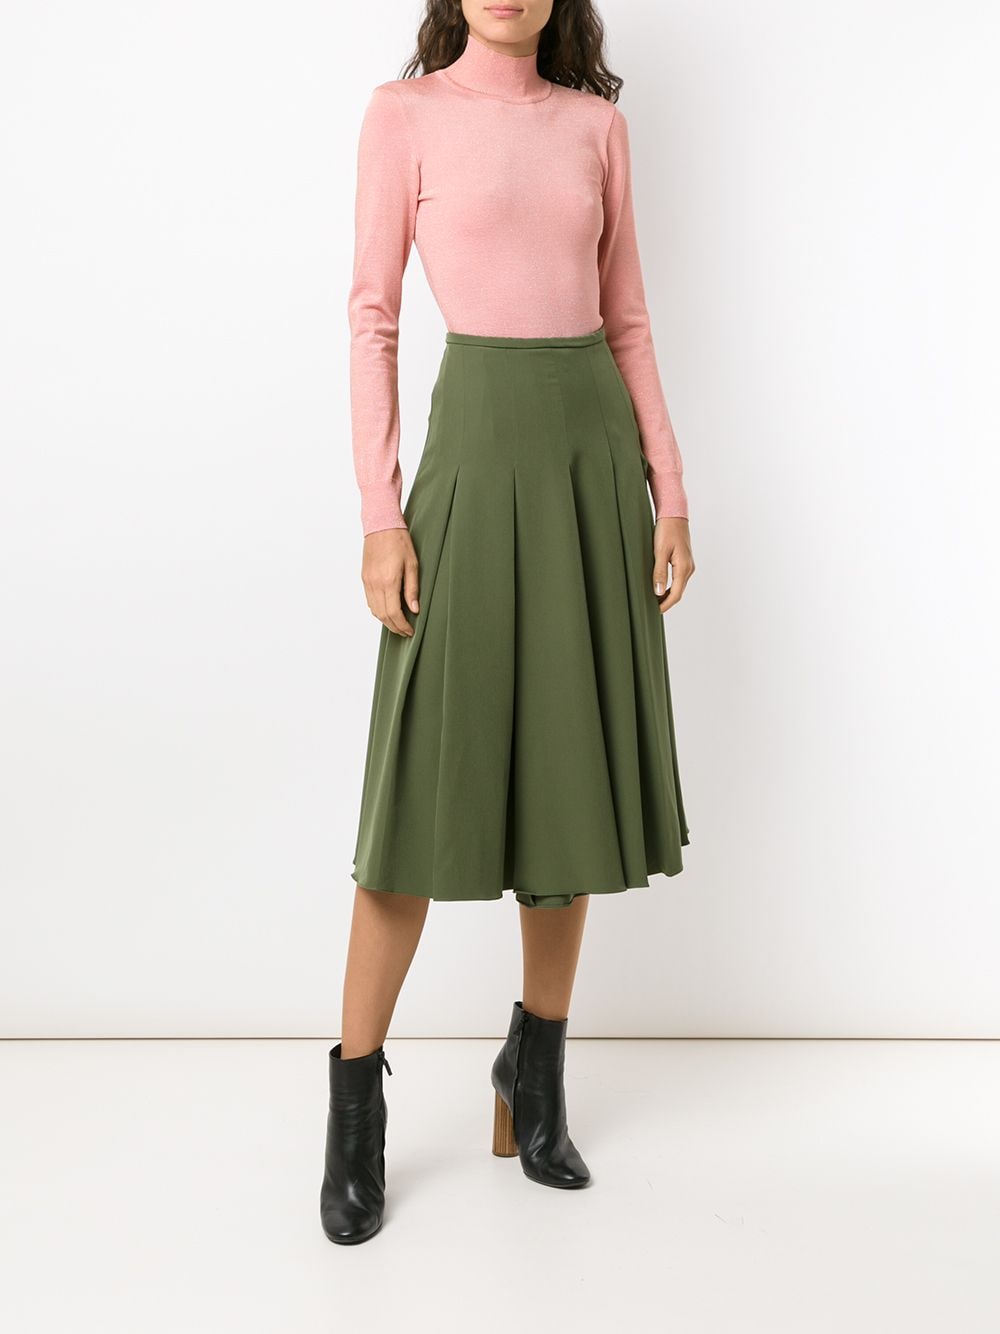 Shop Olympiah midi Salci skirt with Express Delivery - FARFETCH